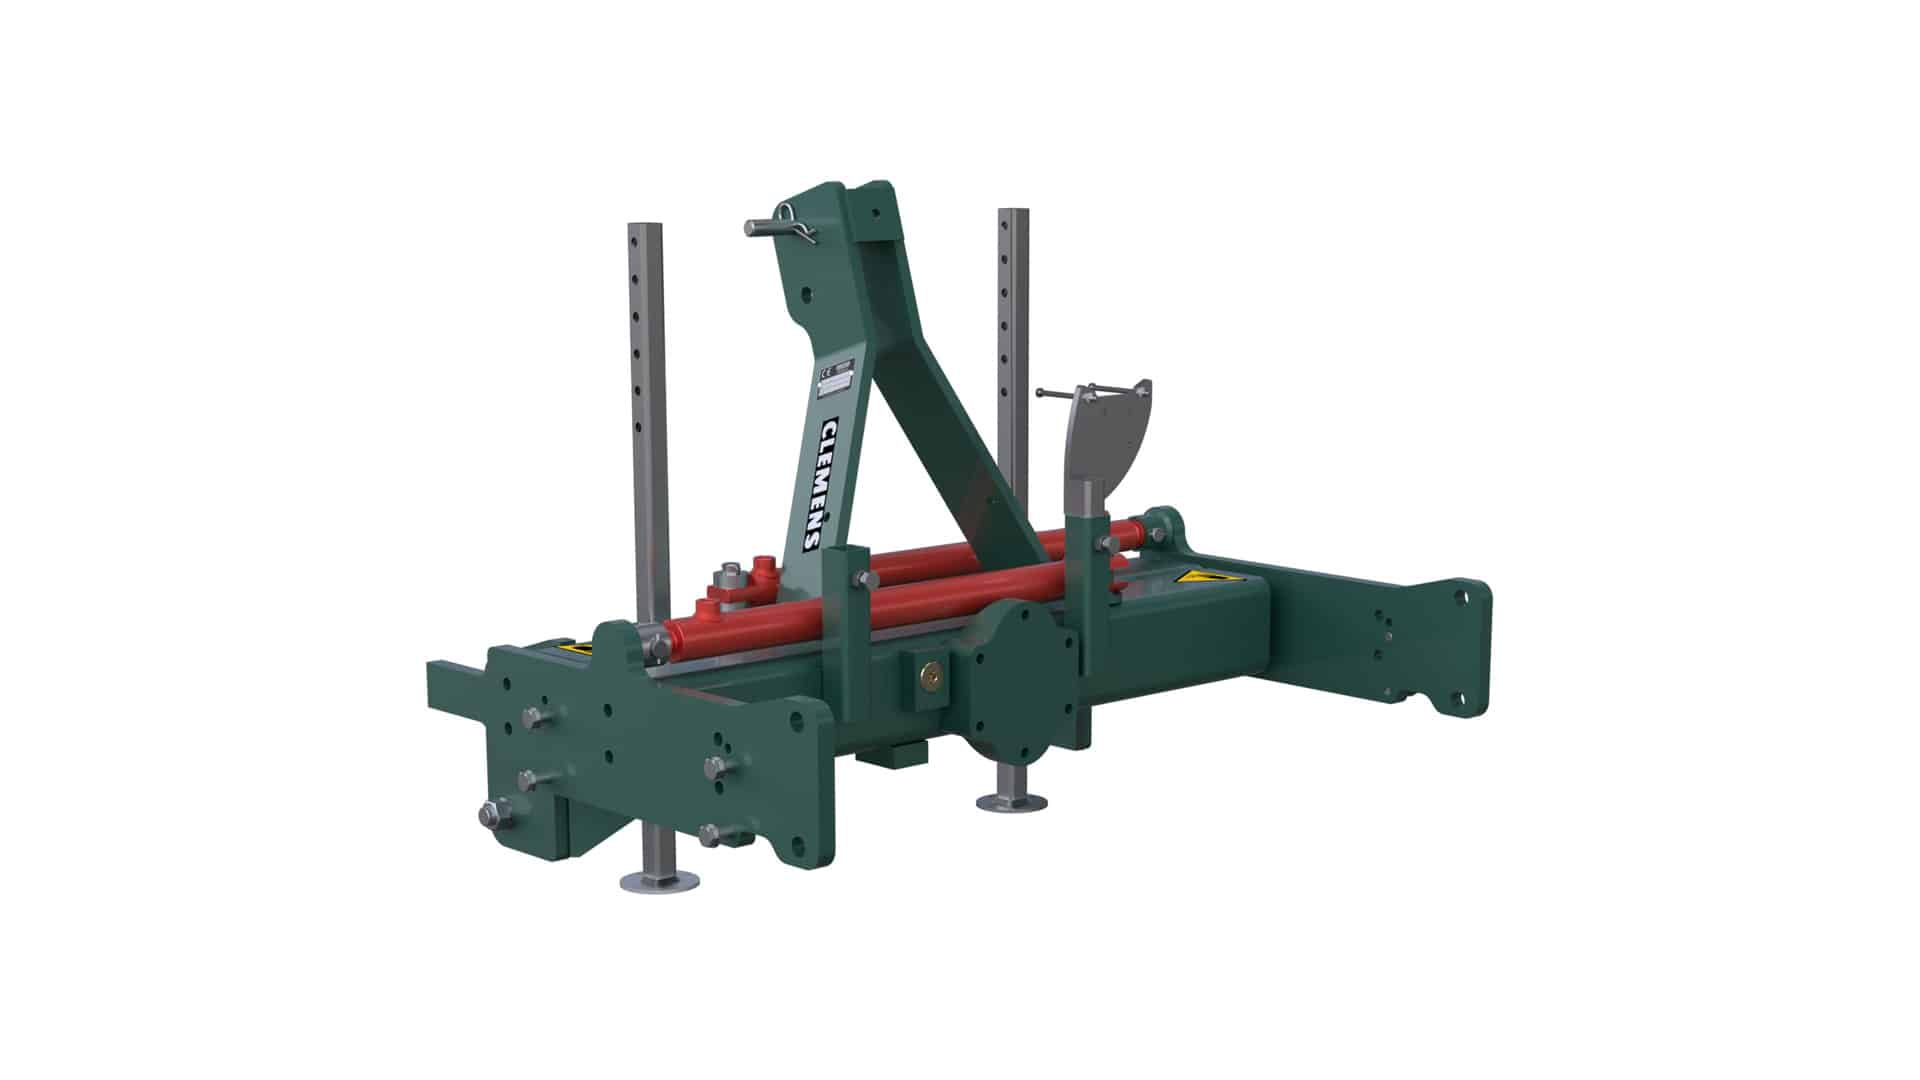 CLEMENS - Tool carrier SB 2